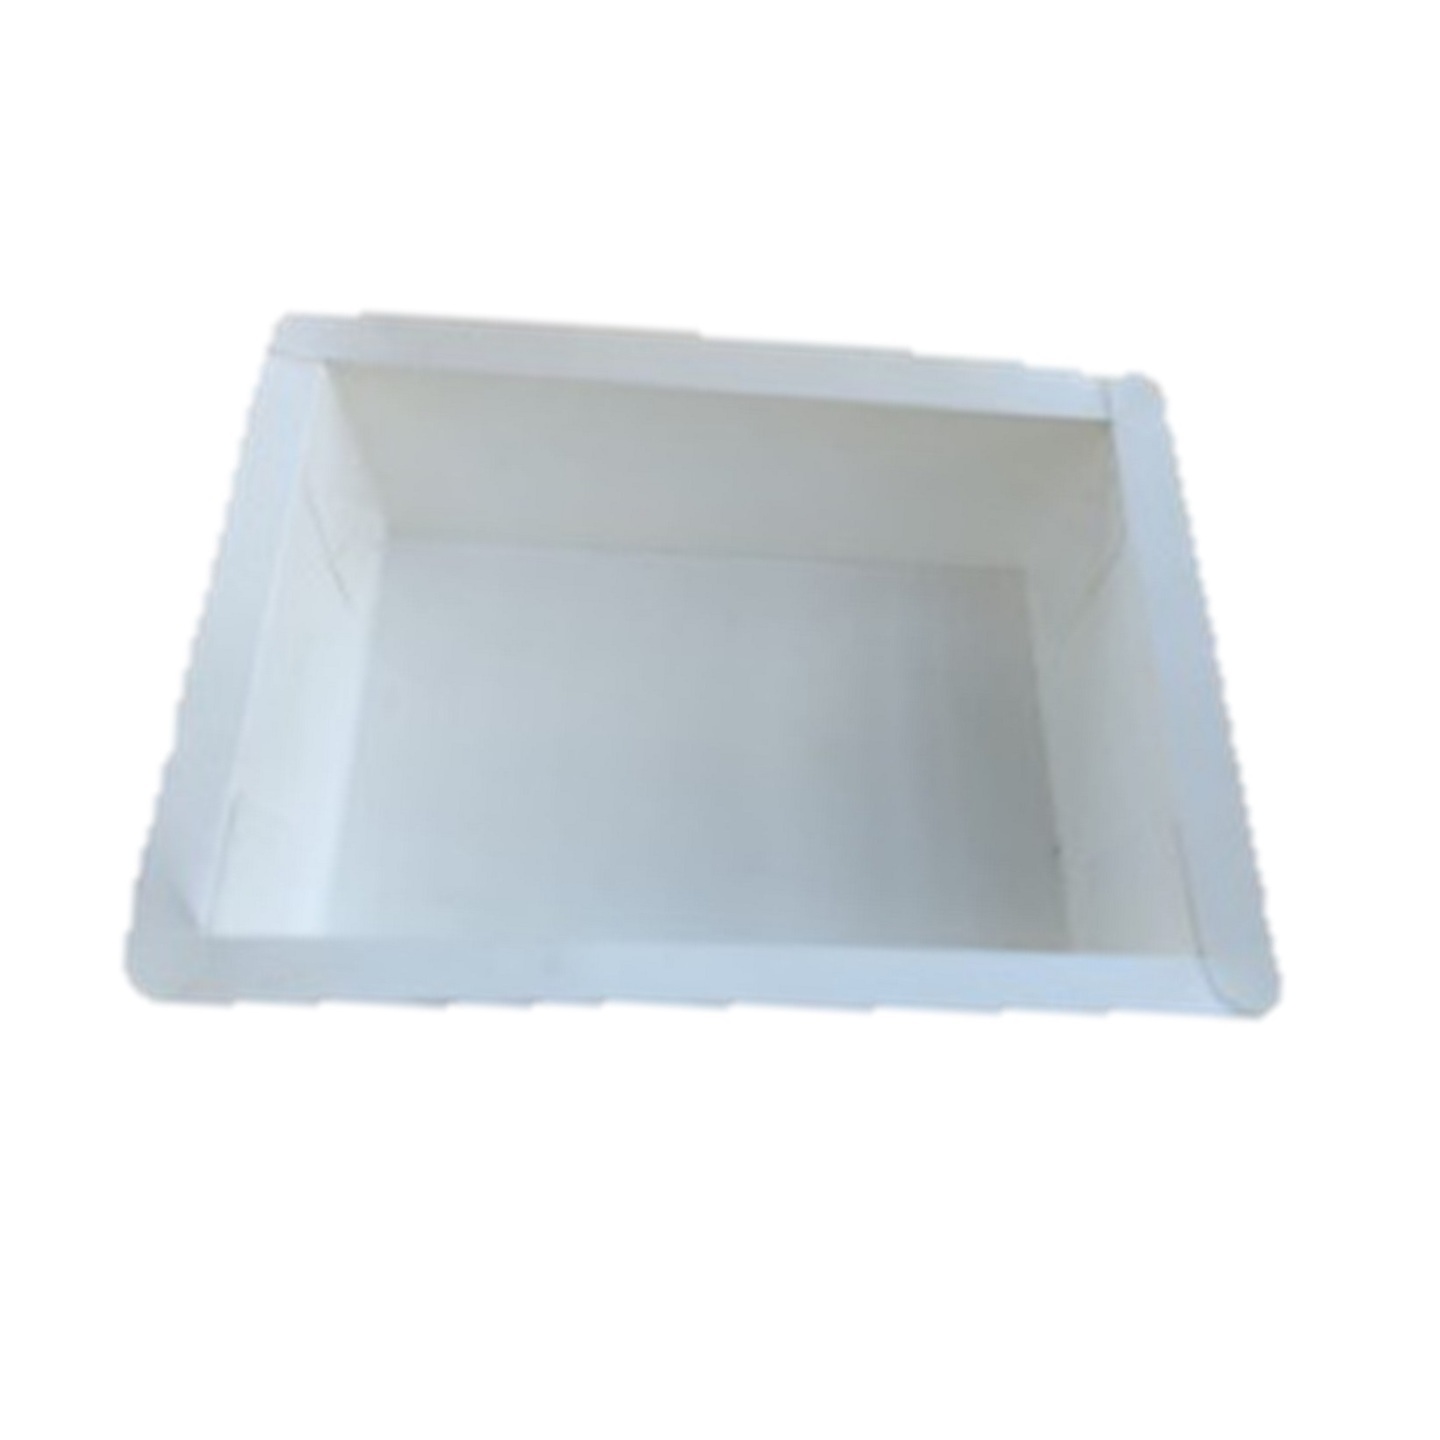 100ml Sealable Paper Food Tray